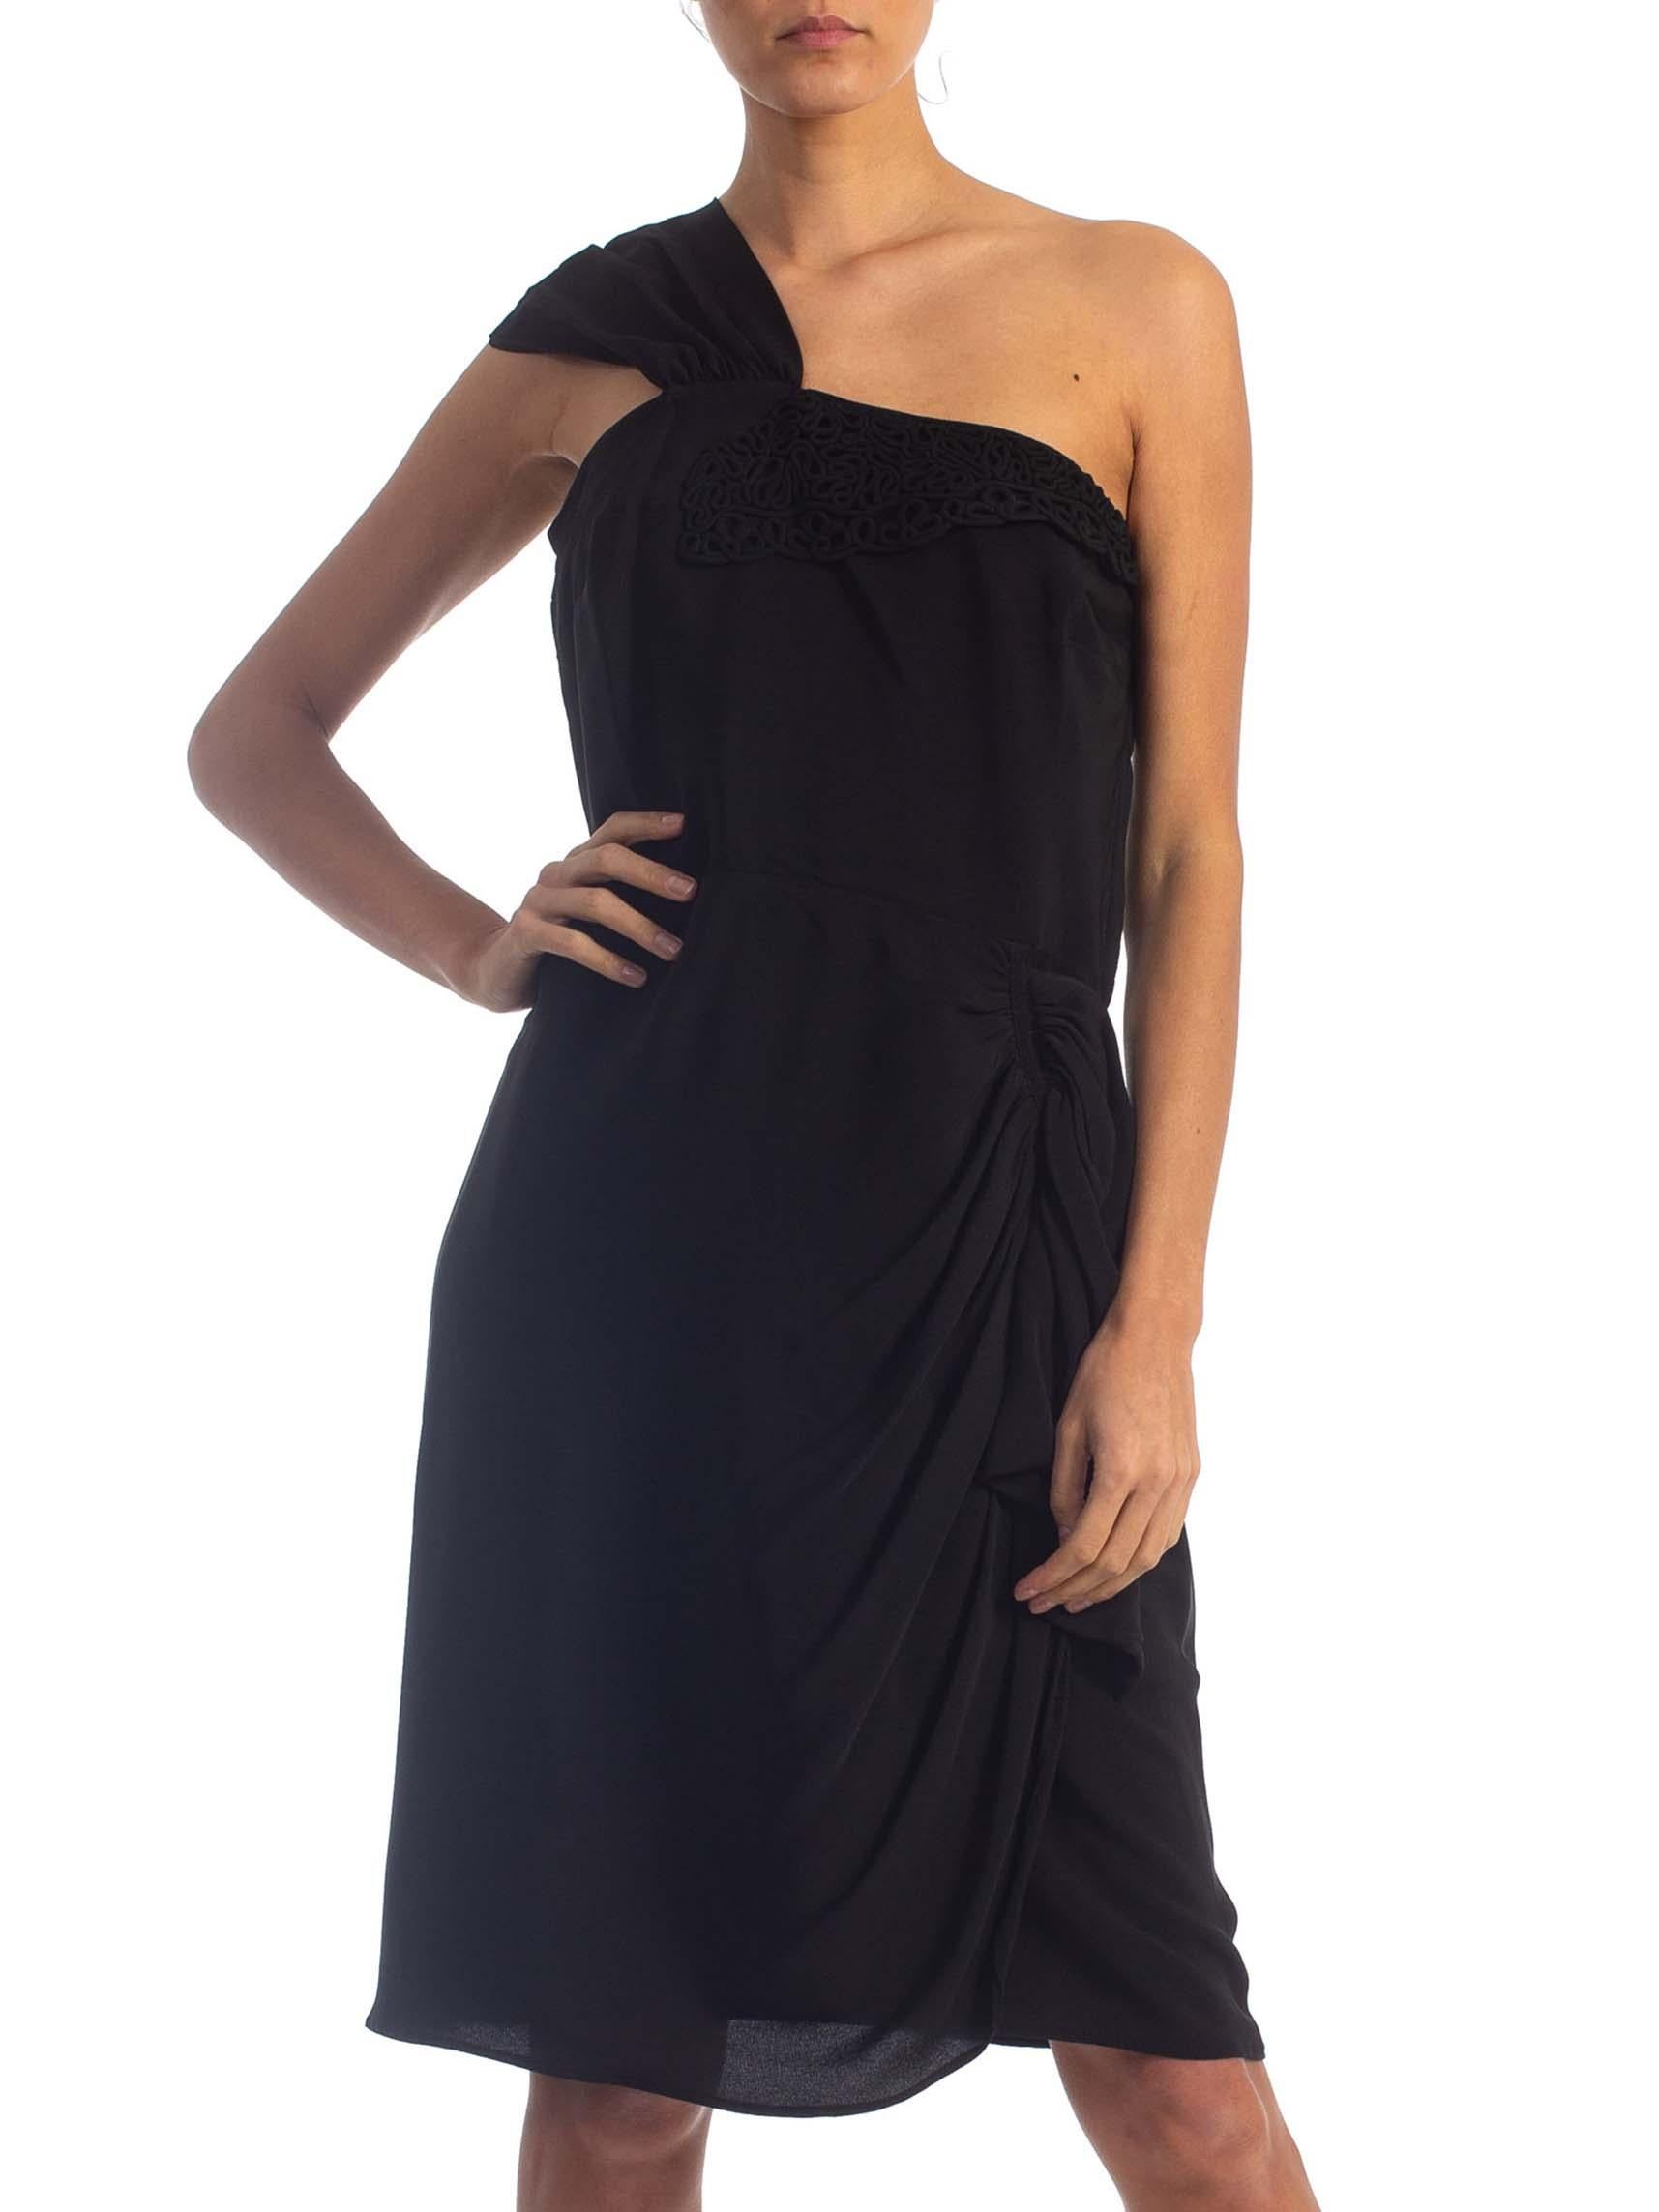 1940'S Black Rayon Crepe One Shoulder Draped Peplum Cocktail Dress For Sale 6